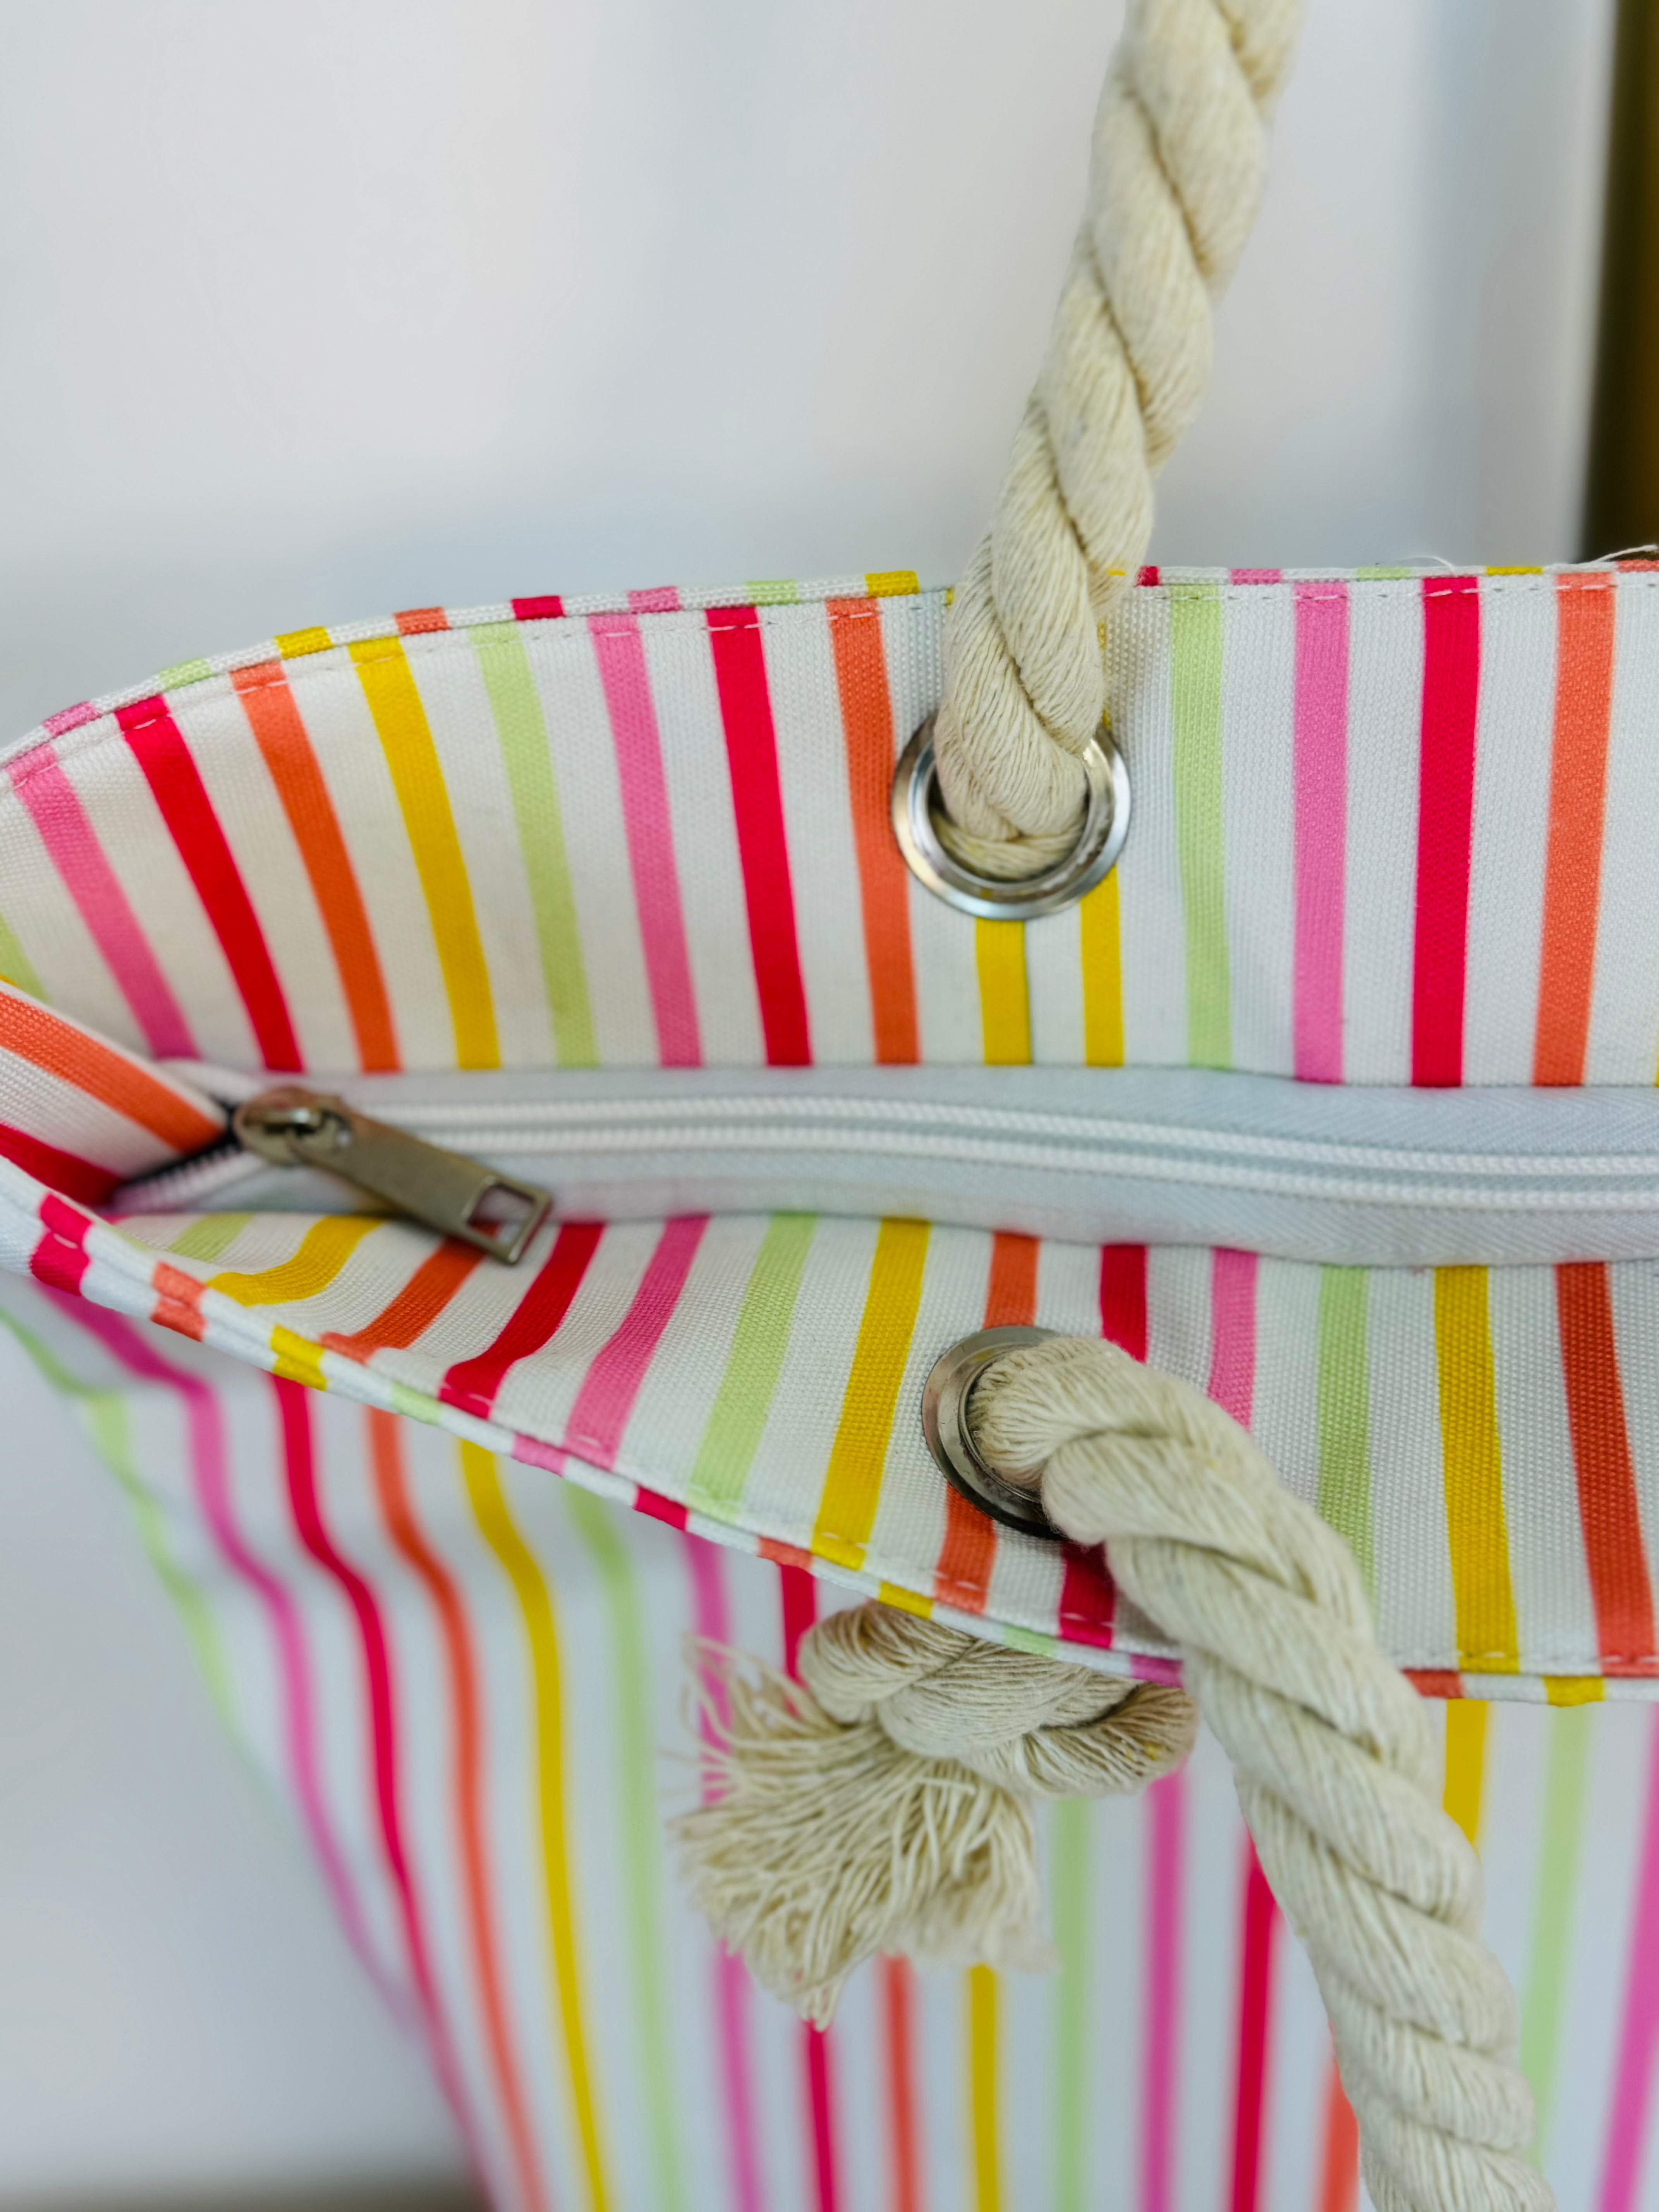 Summer Stripes Tote-290 Bags/Handbags-The Lovely Closet-The Lovely Closet, Women's Fashion Boutique in Alexandria, KY